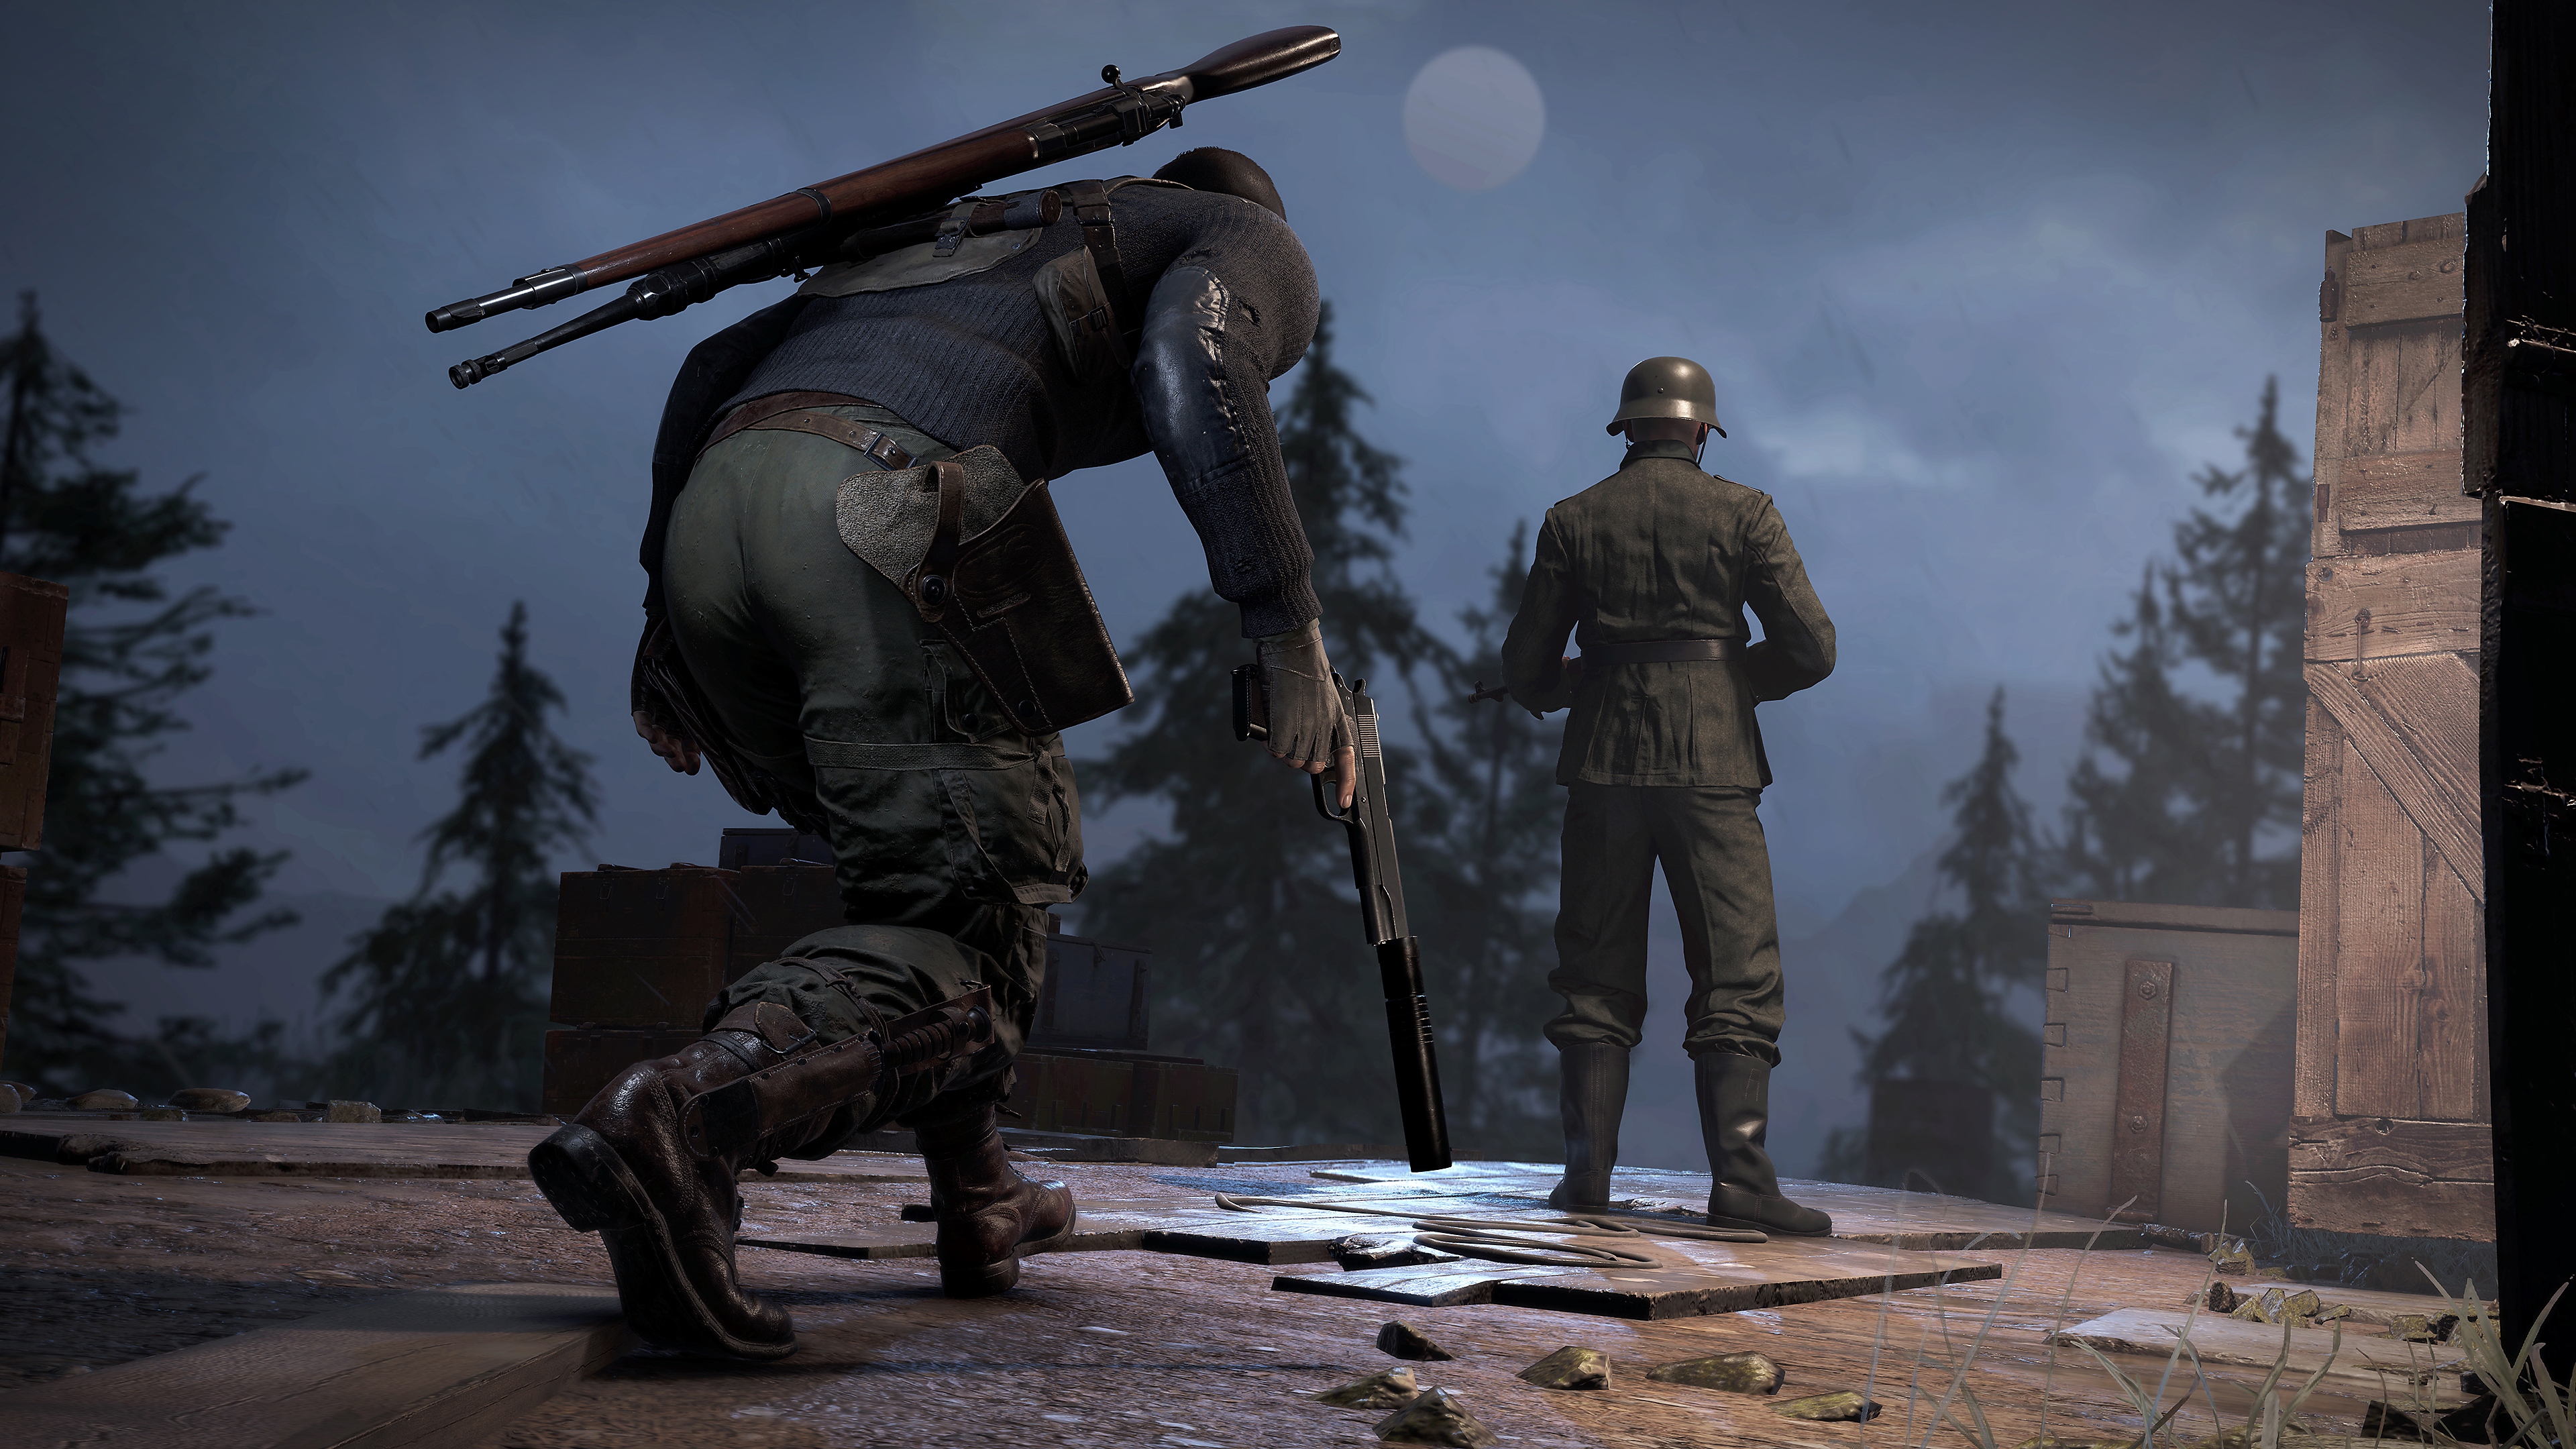 Sniper Elite 5 screenshot showing a character creeping up behind an enemy